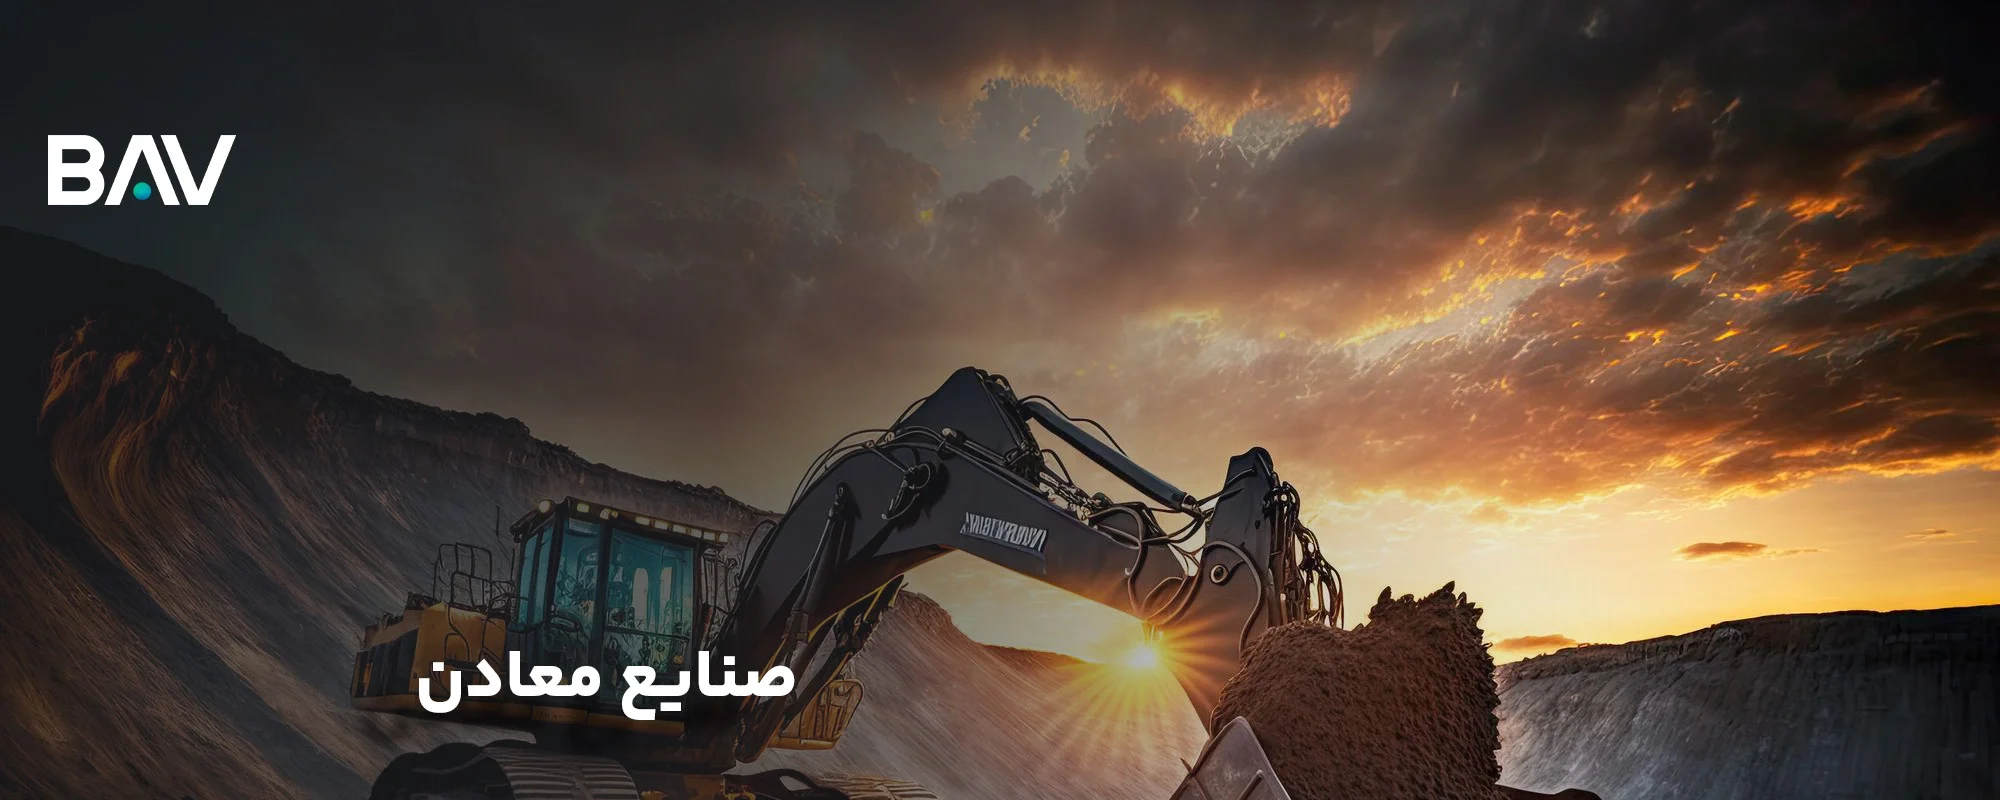 excavator earthmoving coal open pit sunset background recycling coal mining industry 124507 67585 e1709189474402